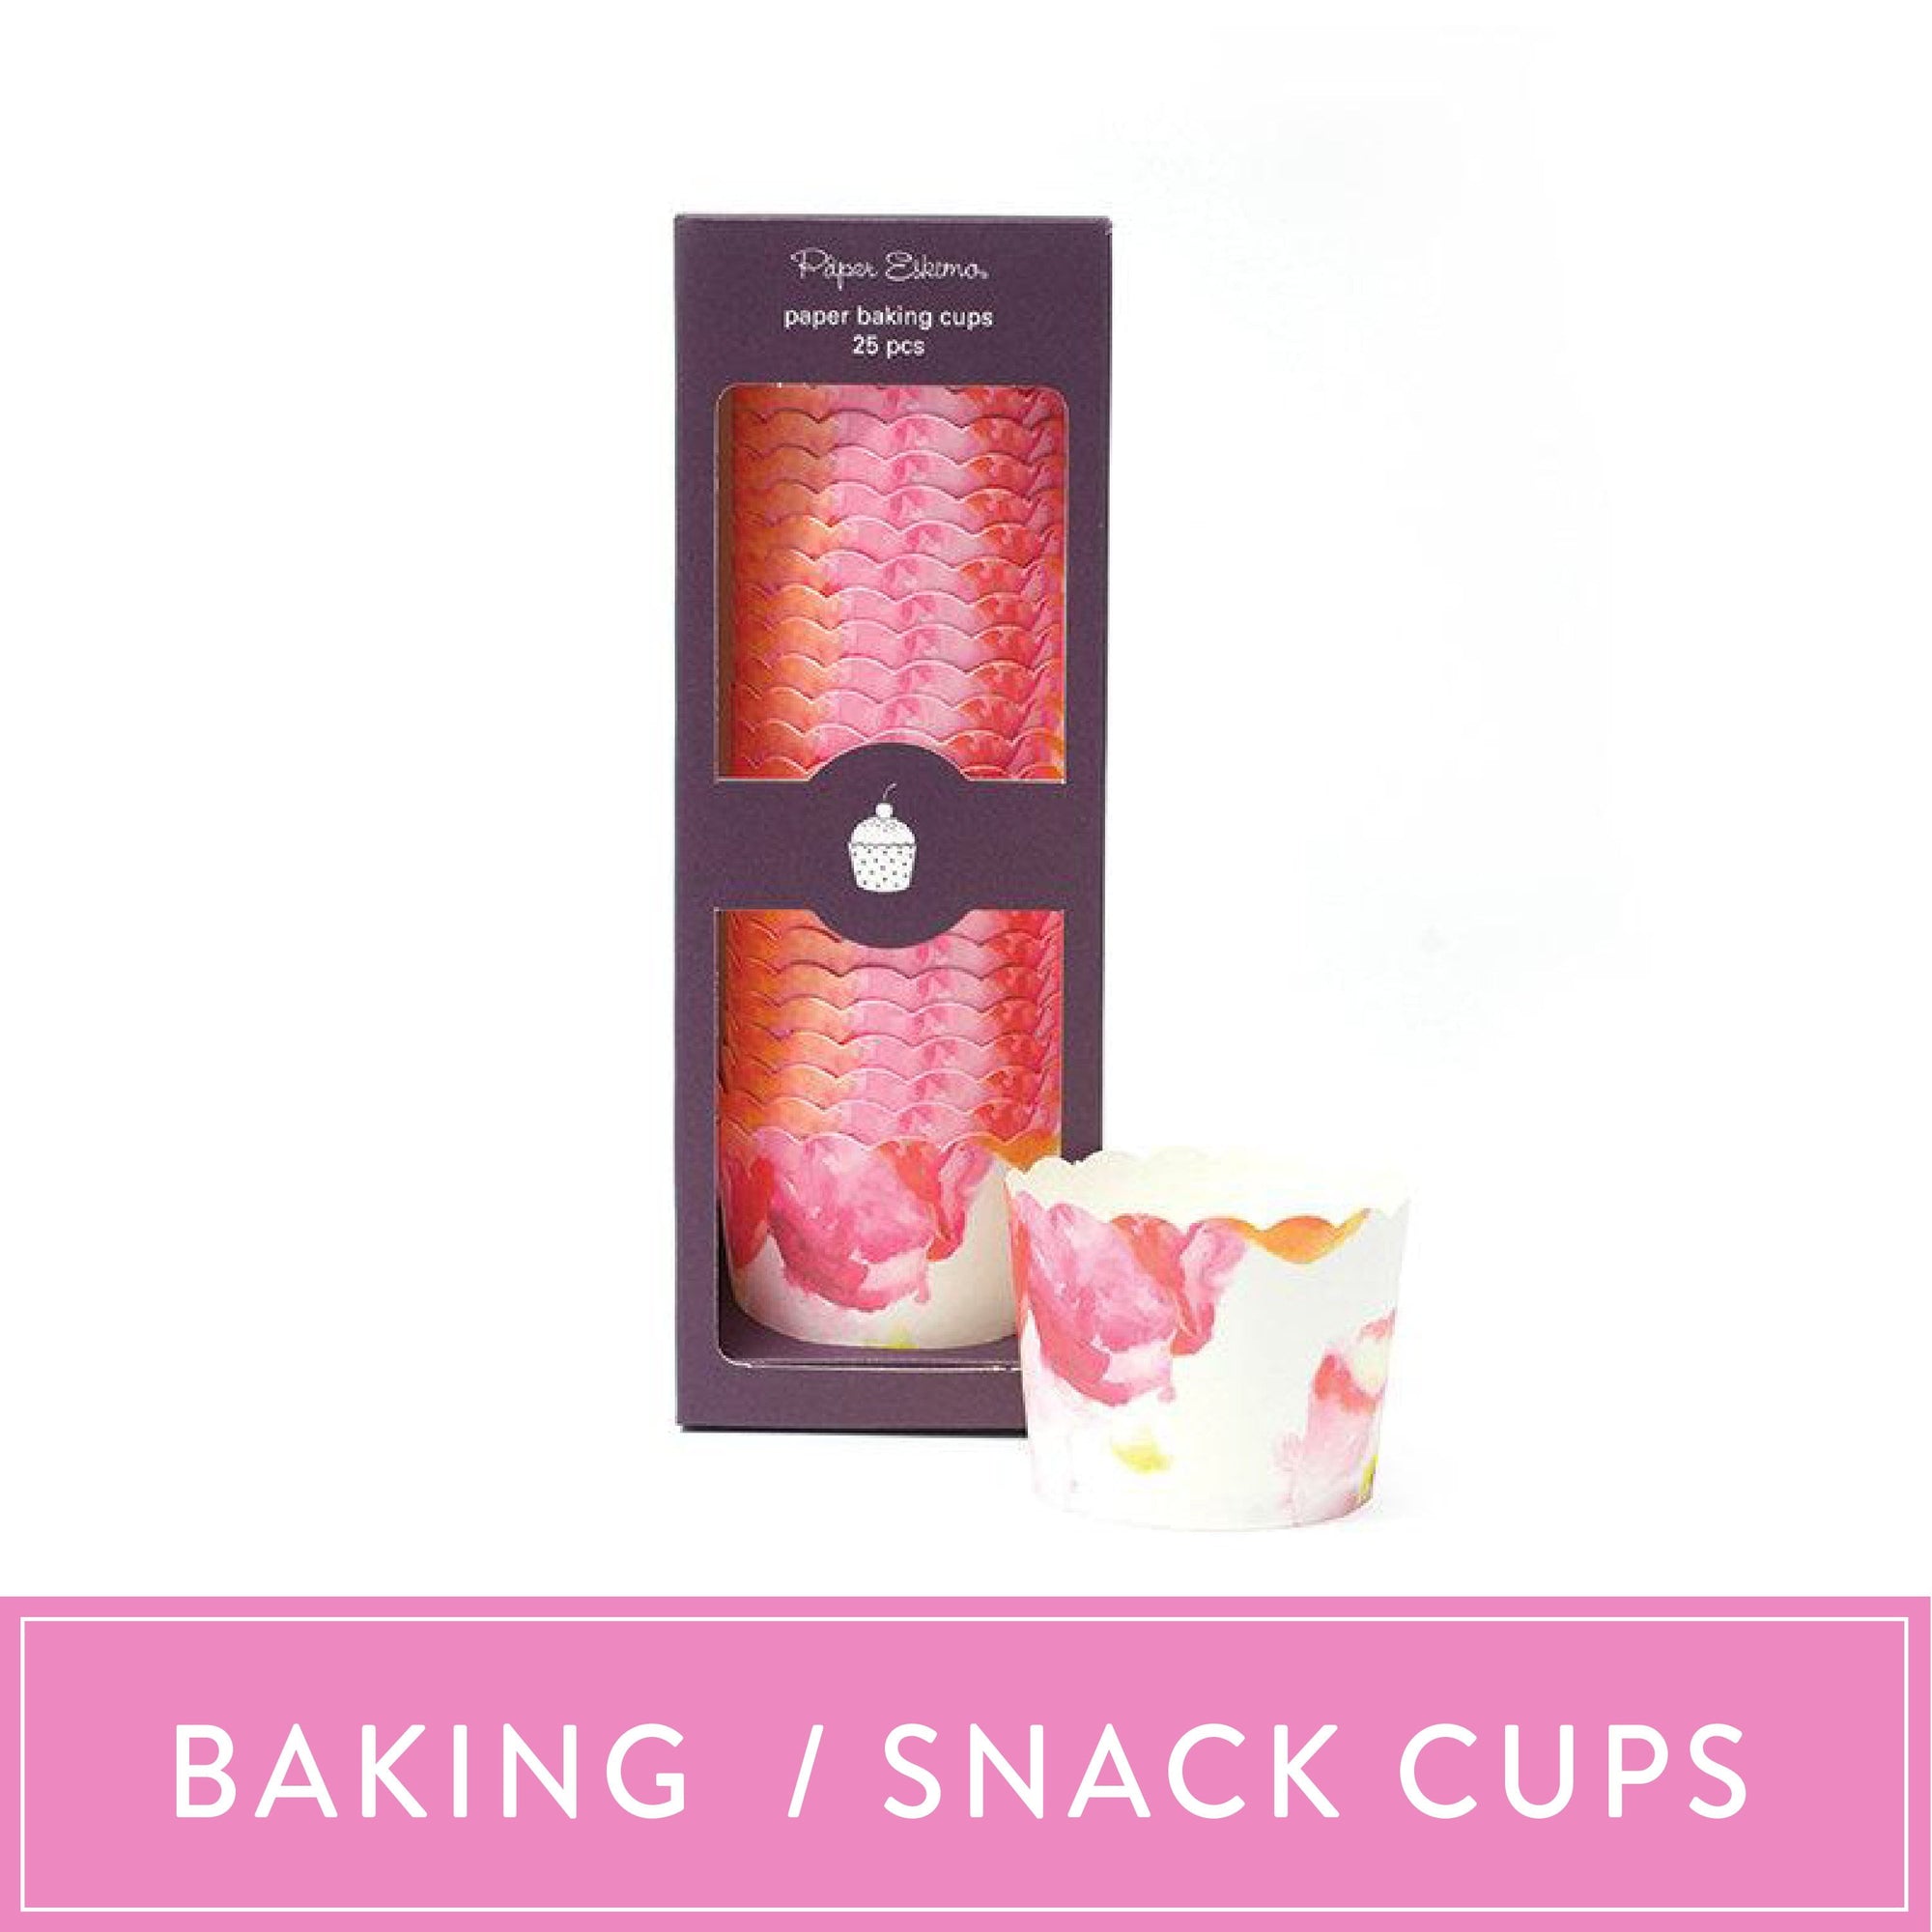 Baking Cups & Snack Cups